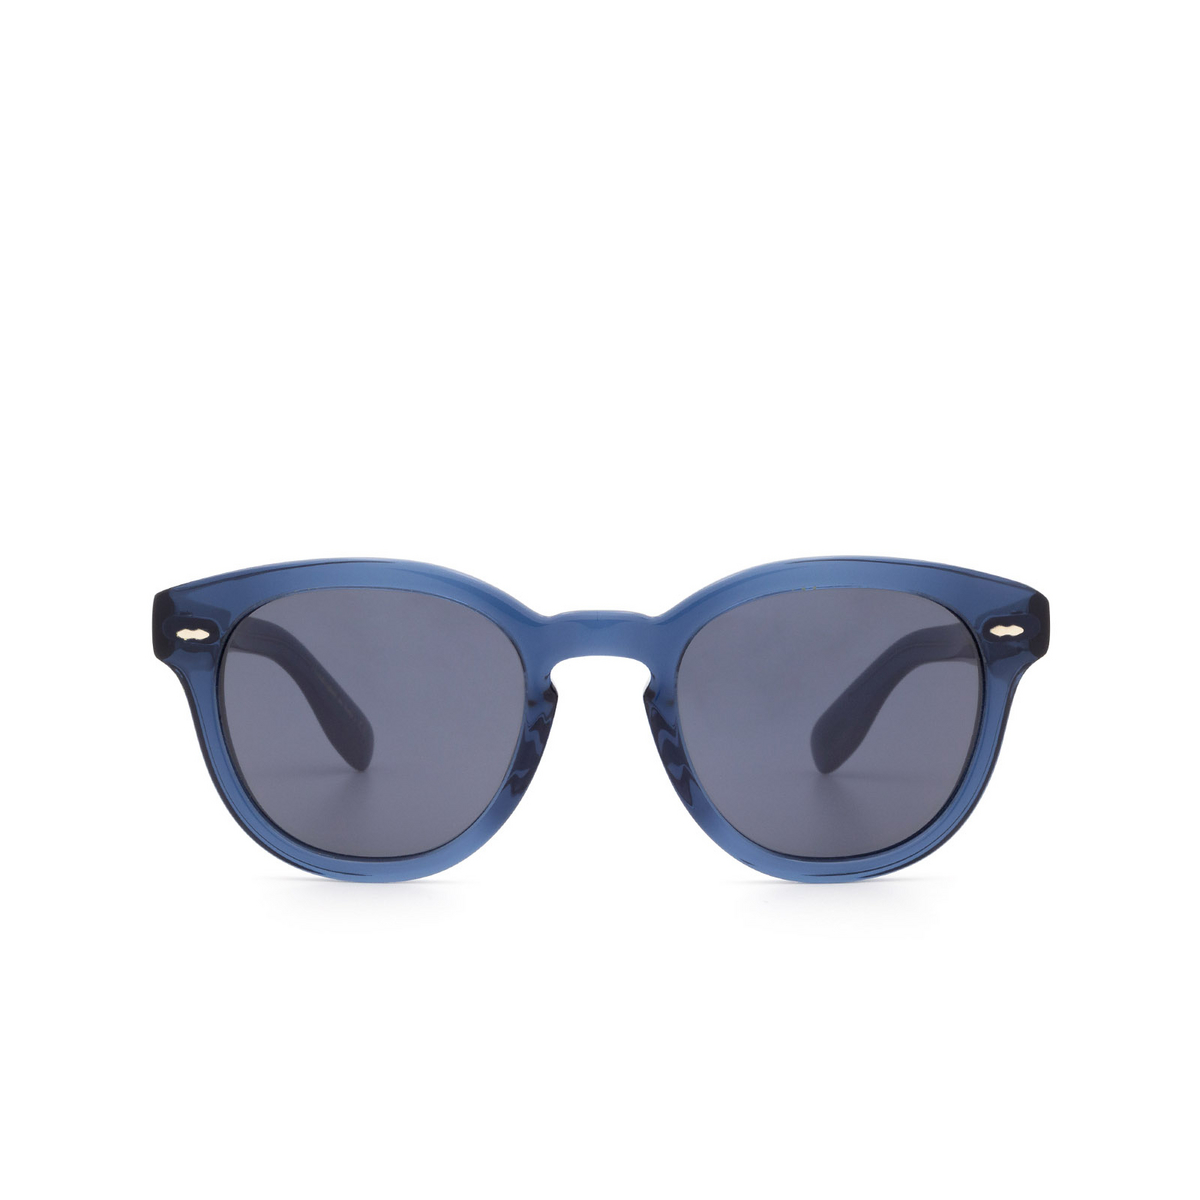 Oliver Peoples CARY GRANT Sunglasses 1670R5 Blue - front view